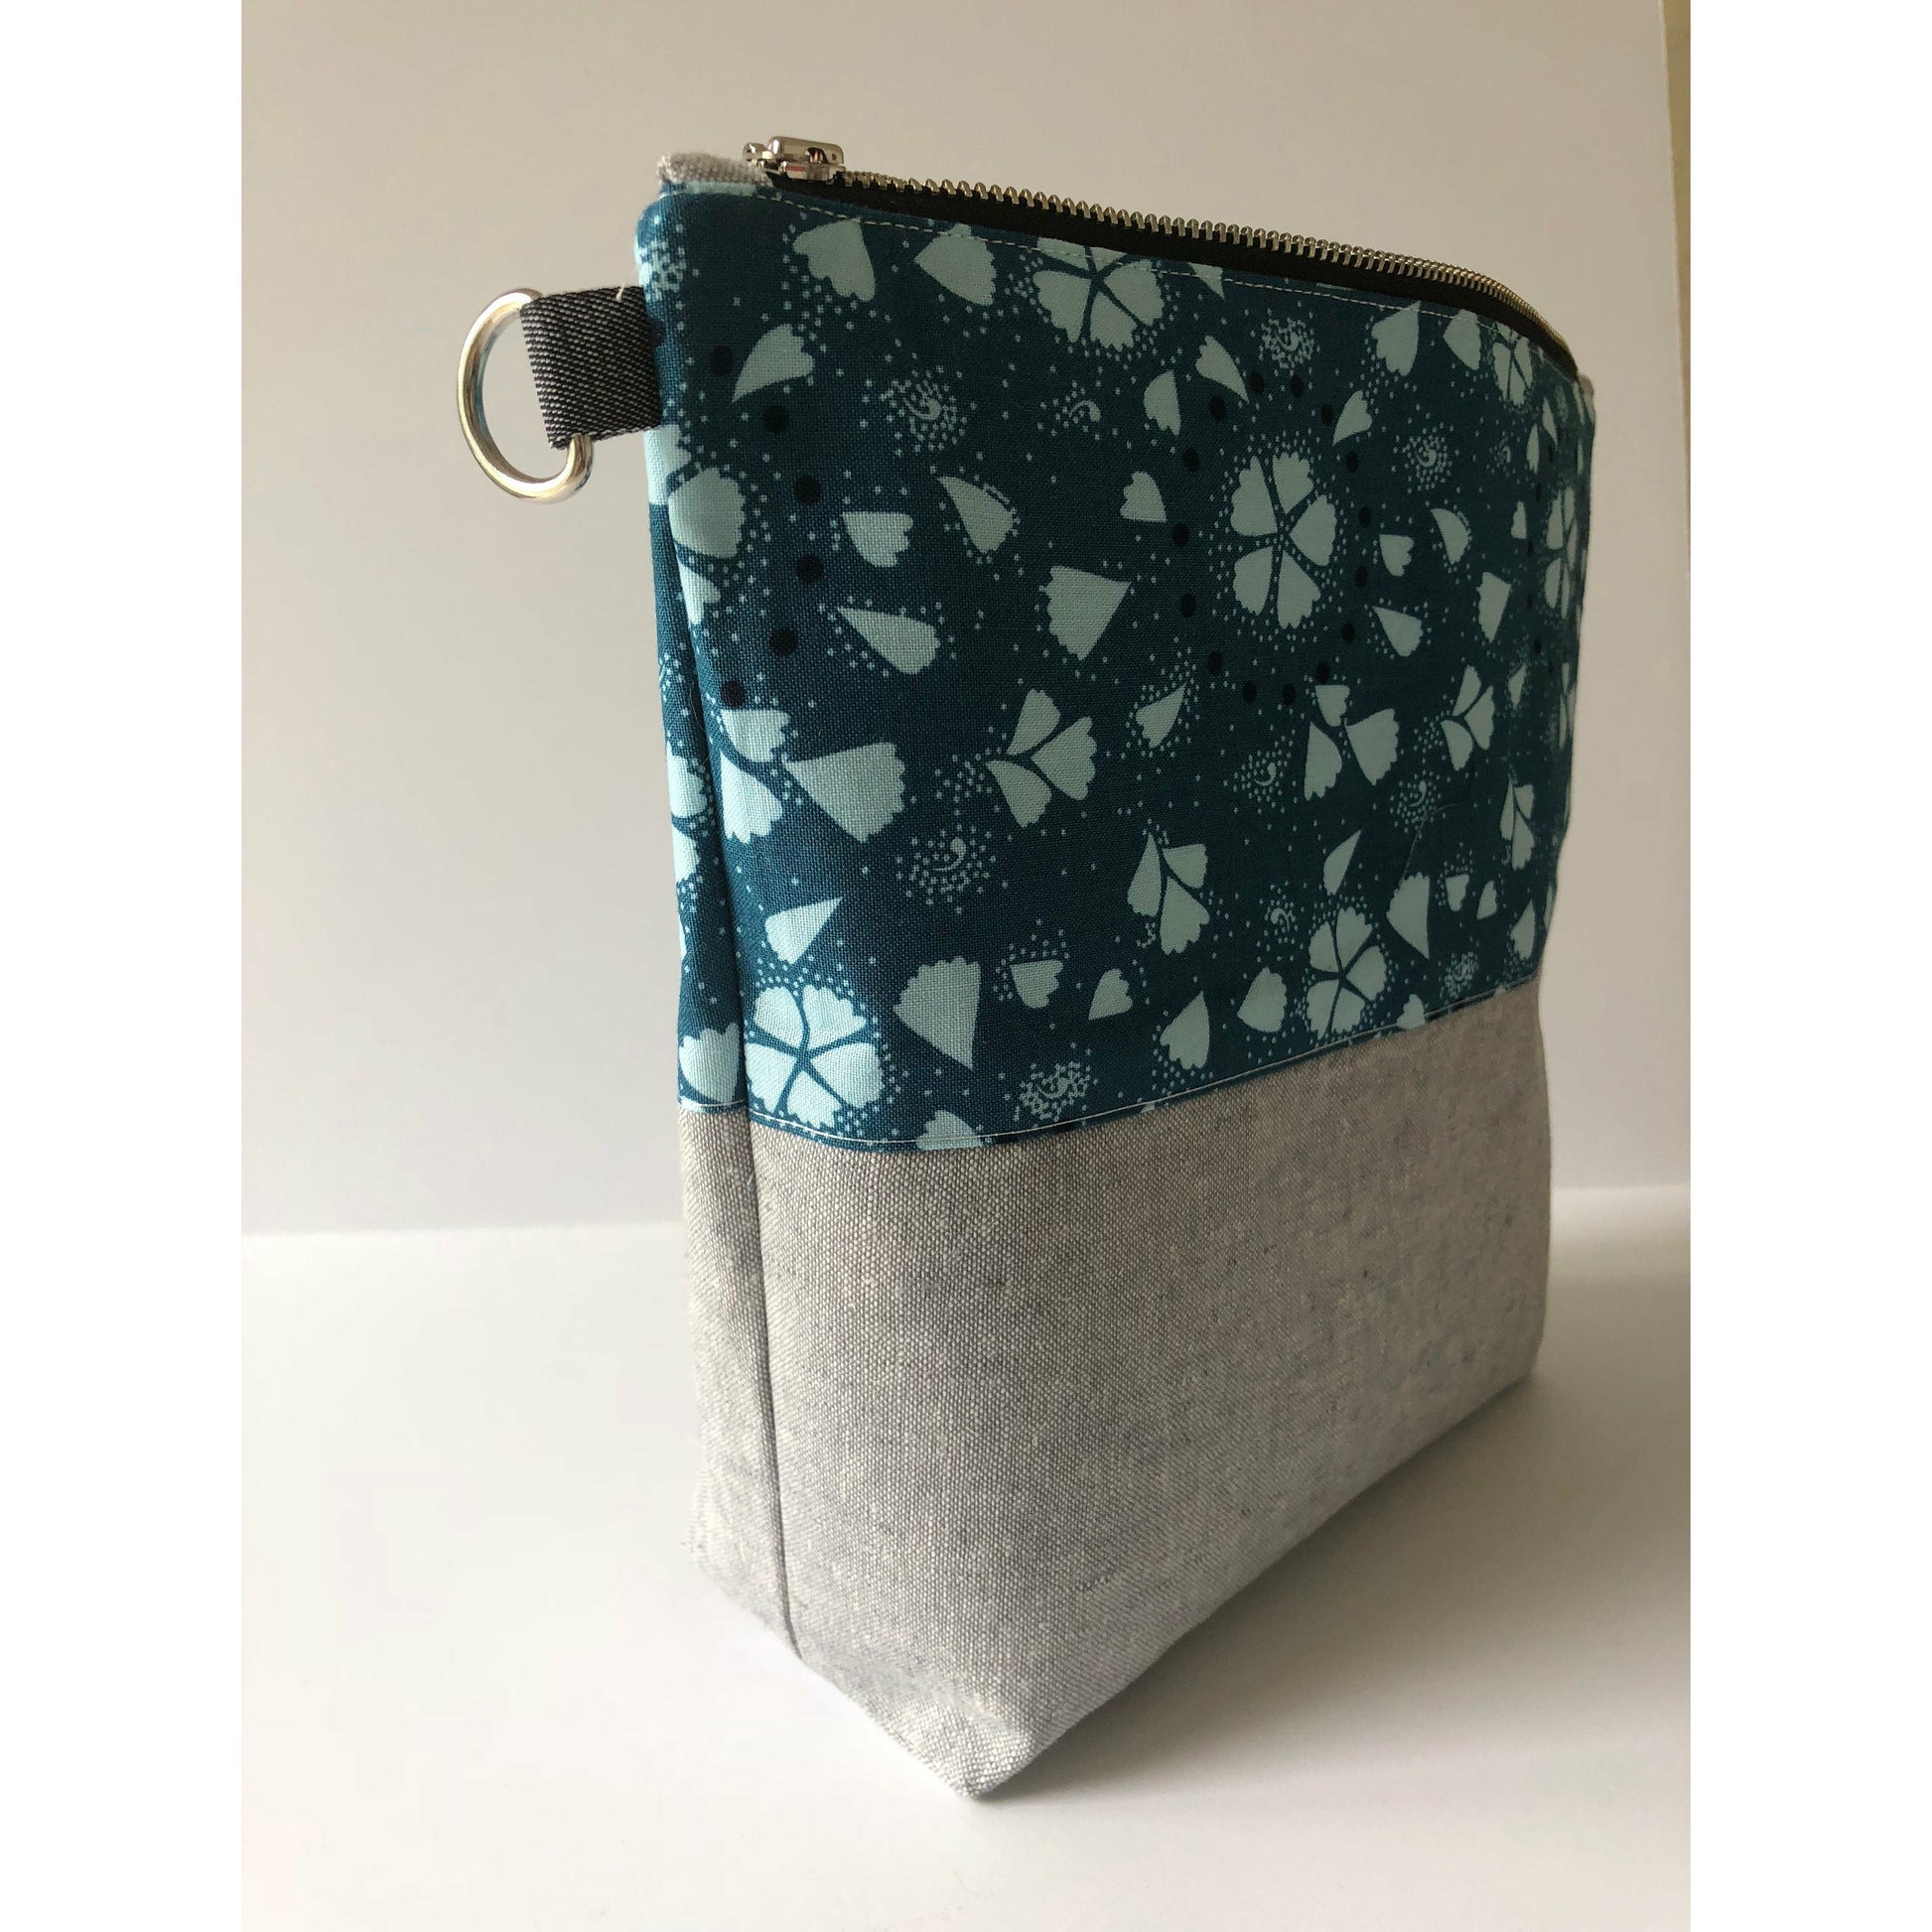 A Kiwi Stitching : Two New Project Bags